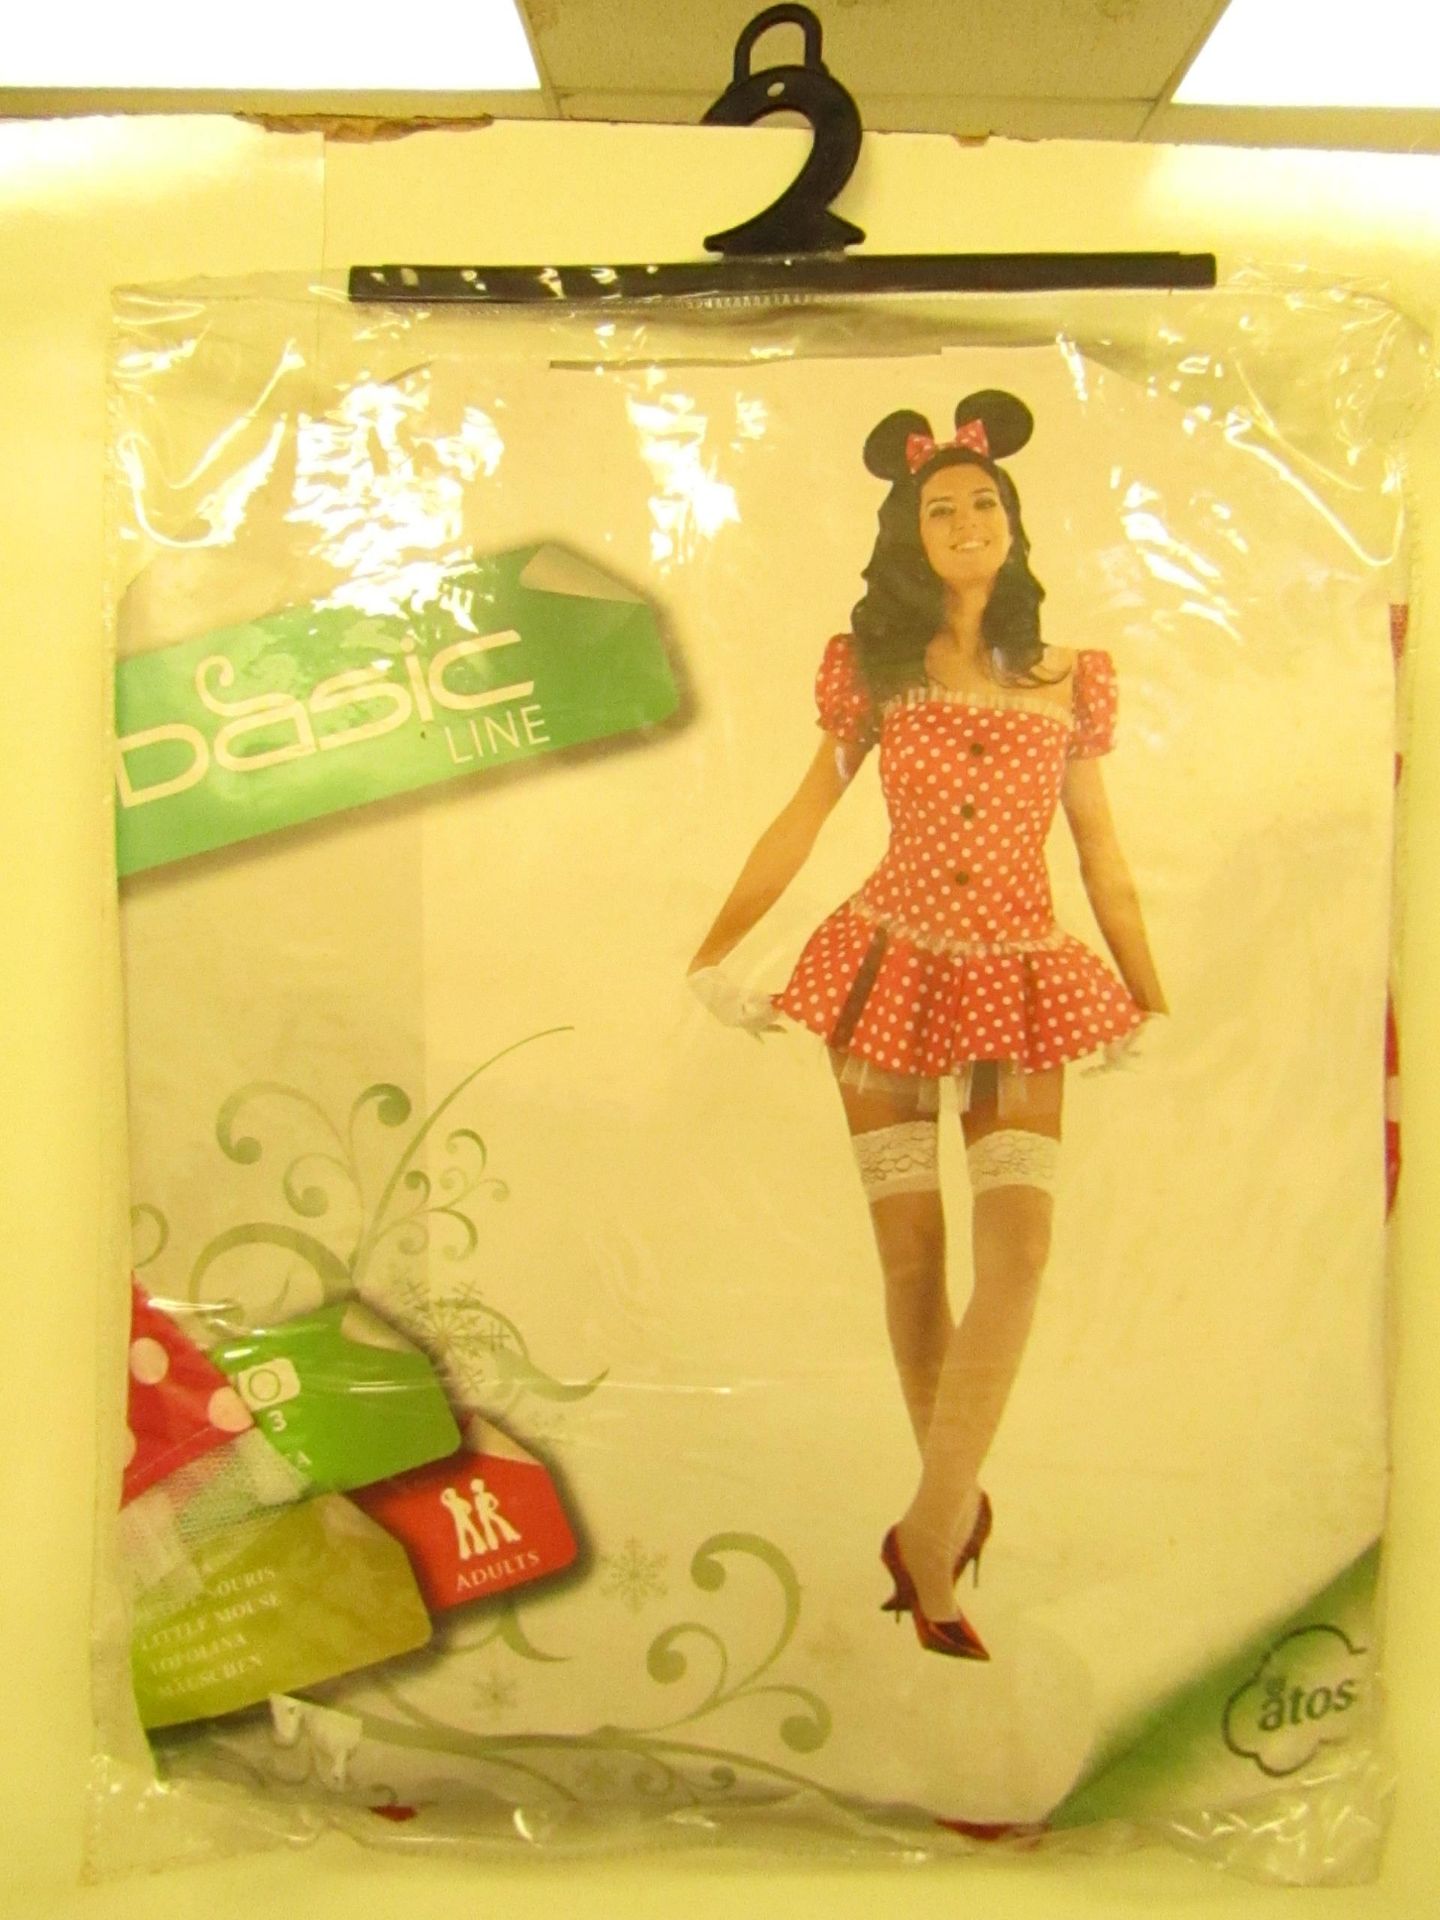 1 x Adult Fancy Dress Little Mouse Outfit size S/M new & packaged